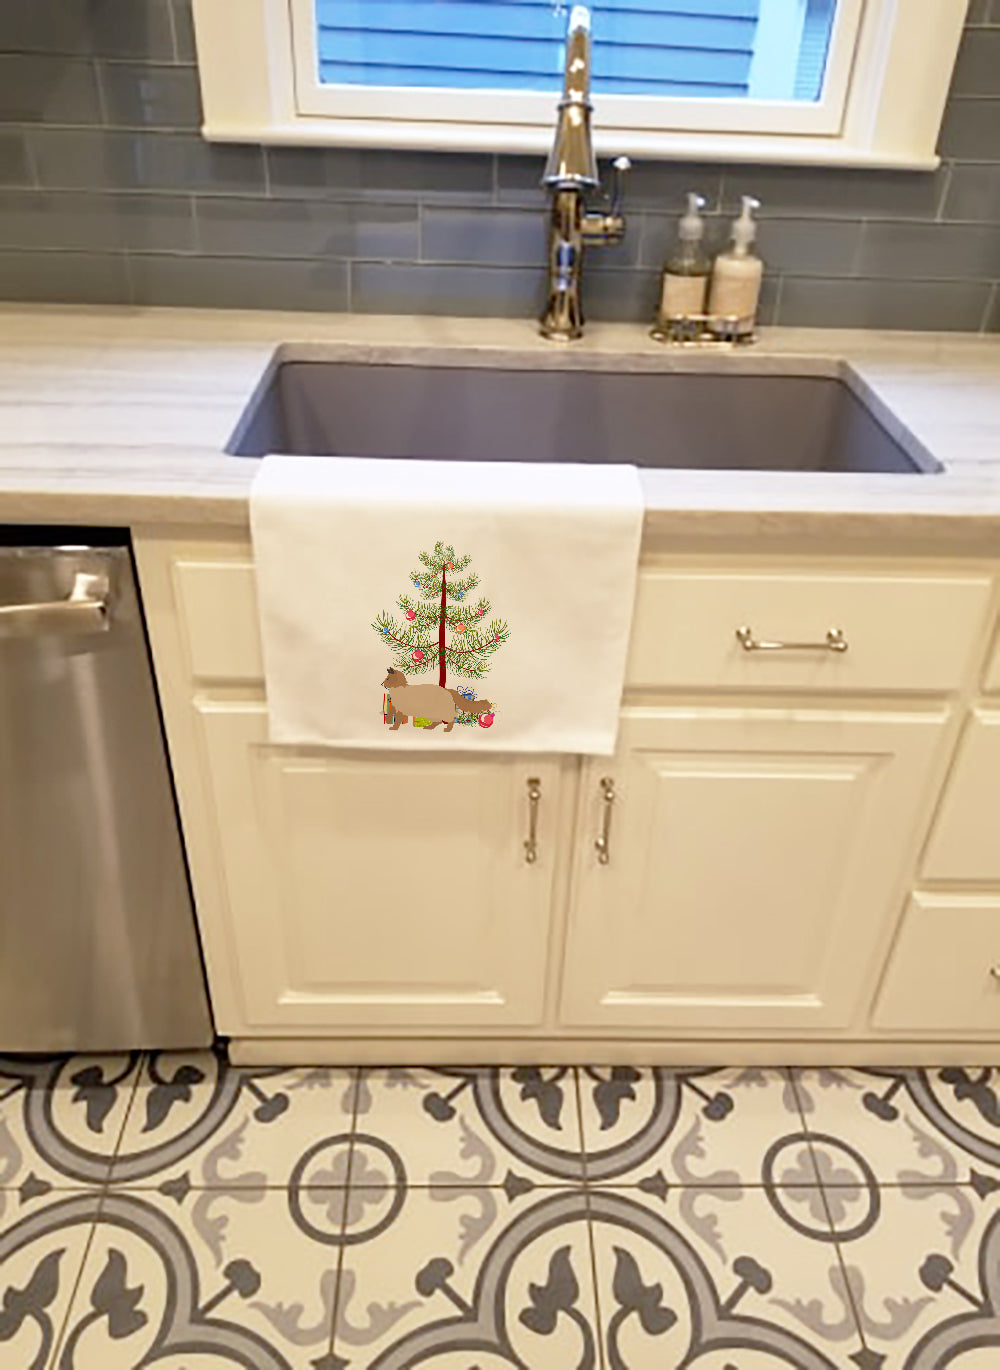 Buy this Ragdoll #2 Cat Merry Christmas White Kitchen Towel Set of 2